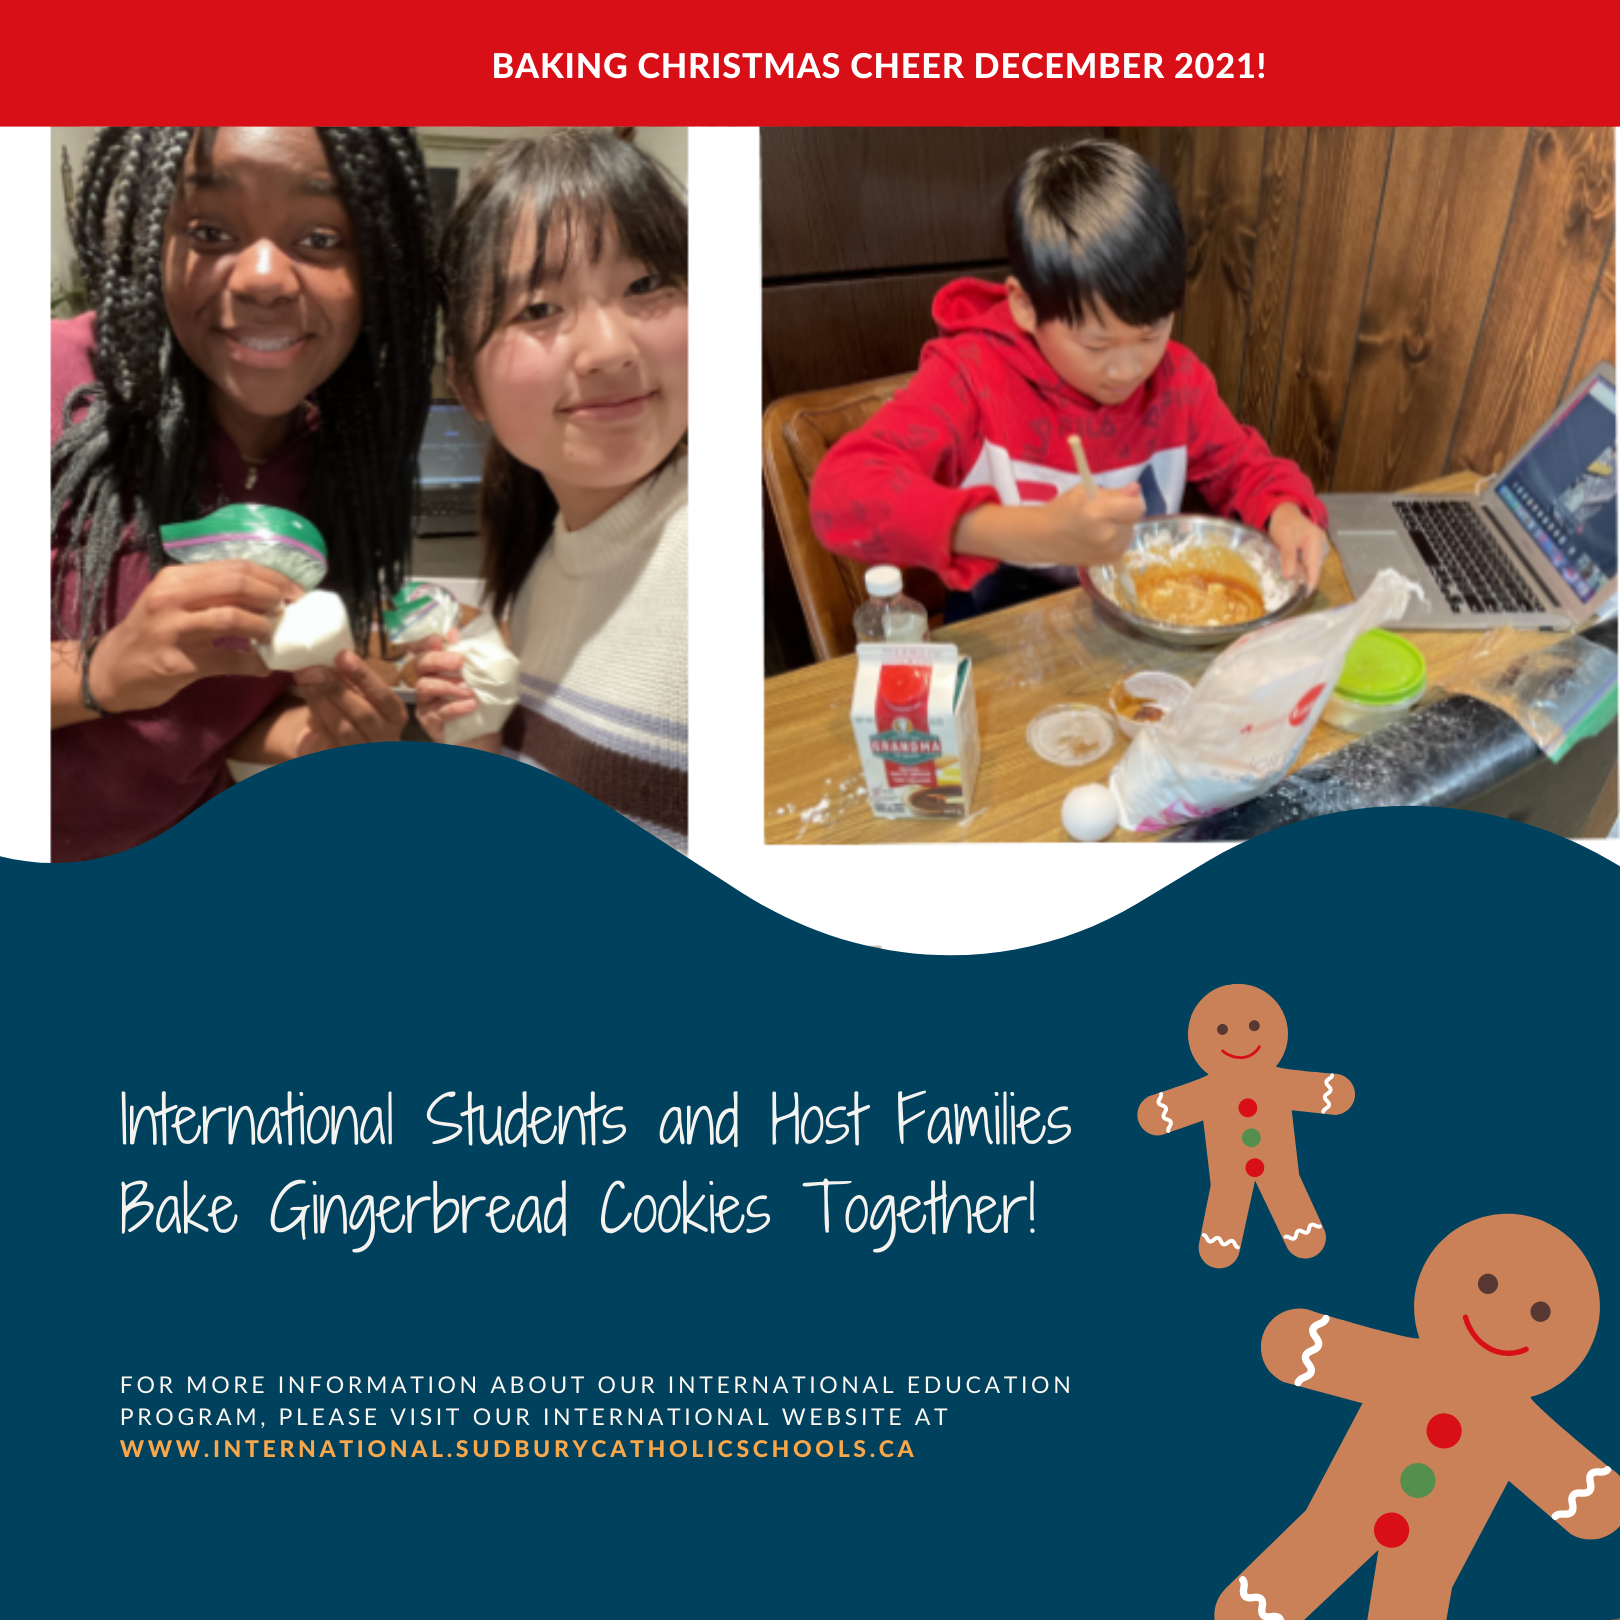 International Students and Host Families Bake Gingerbread Cookies Together!